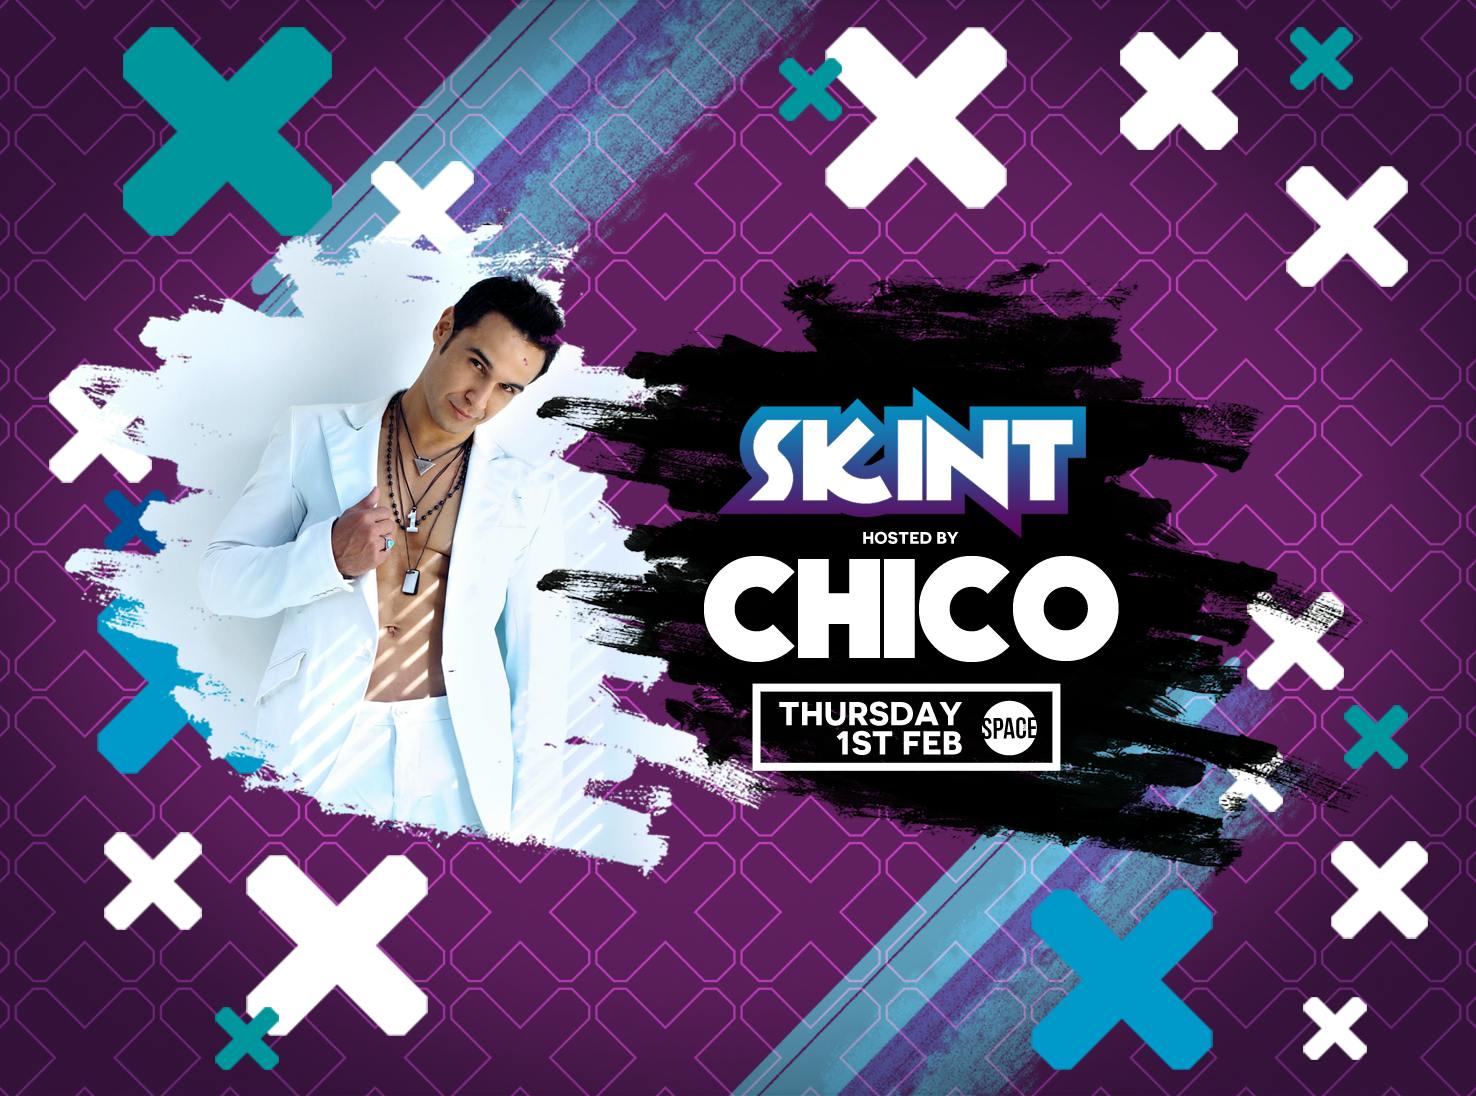 SKINT hosted by CHICO